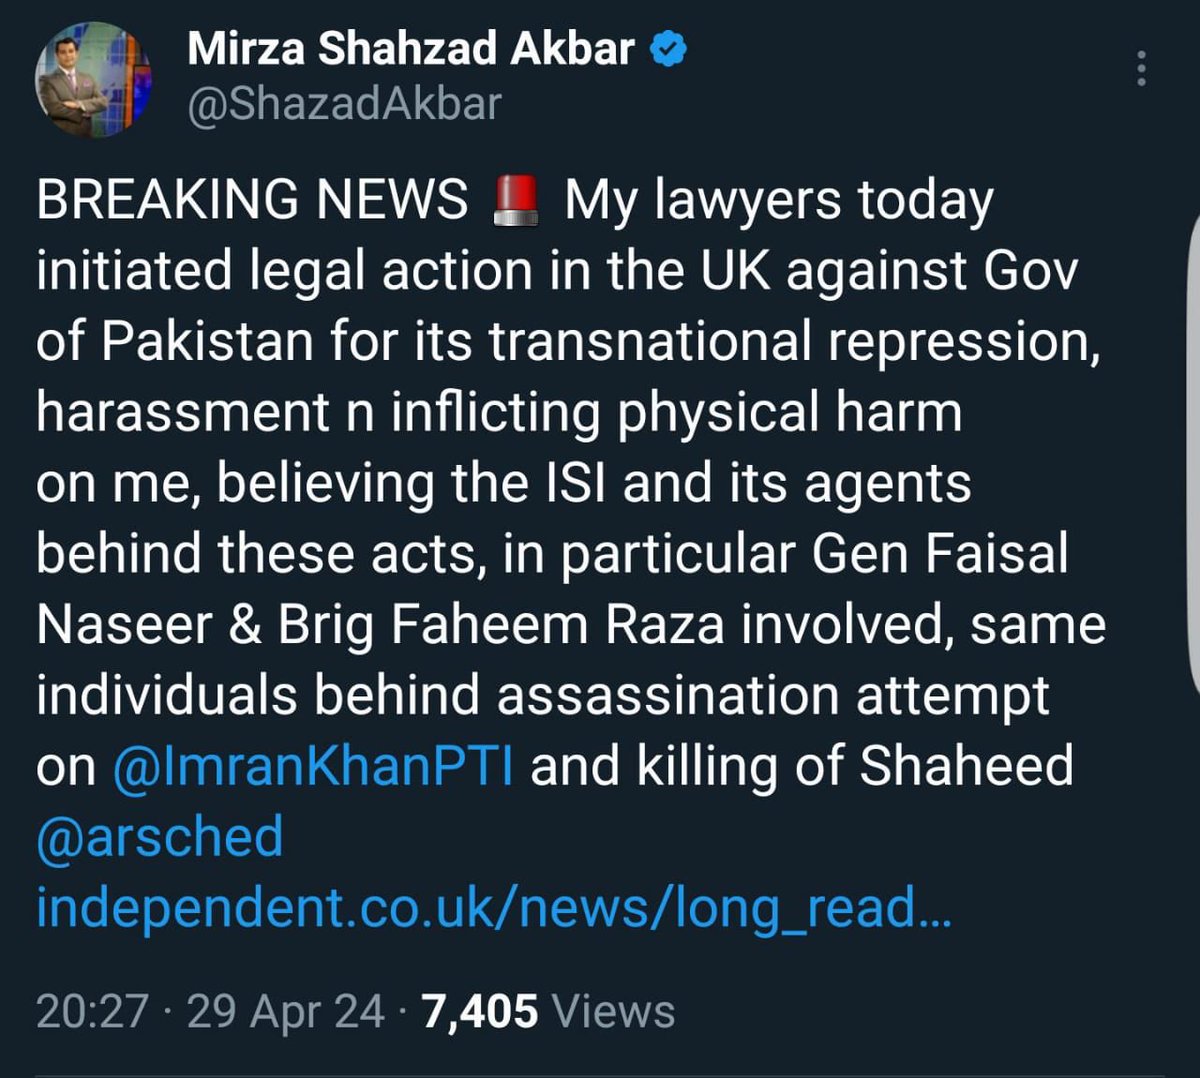 Great fight begins. My lawyers are doing the same from the US. ⁦@ShazadAkbar⁩